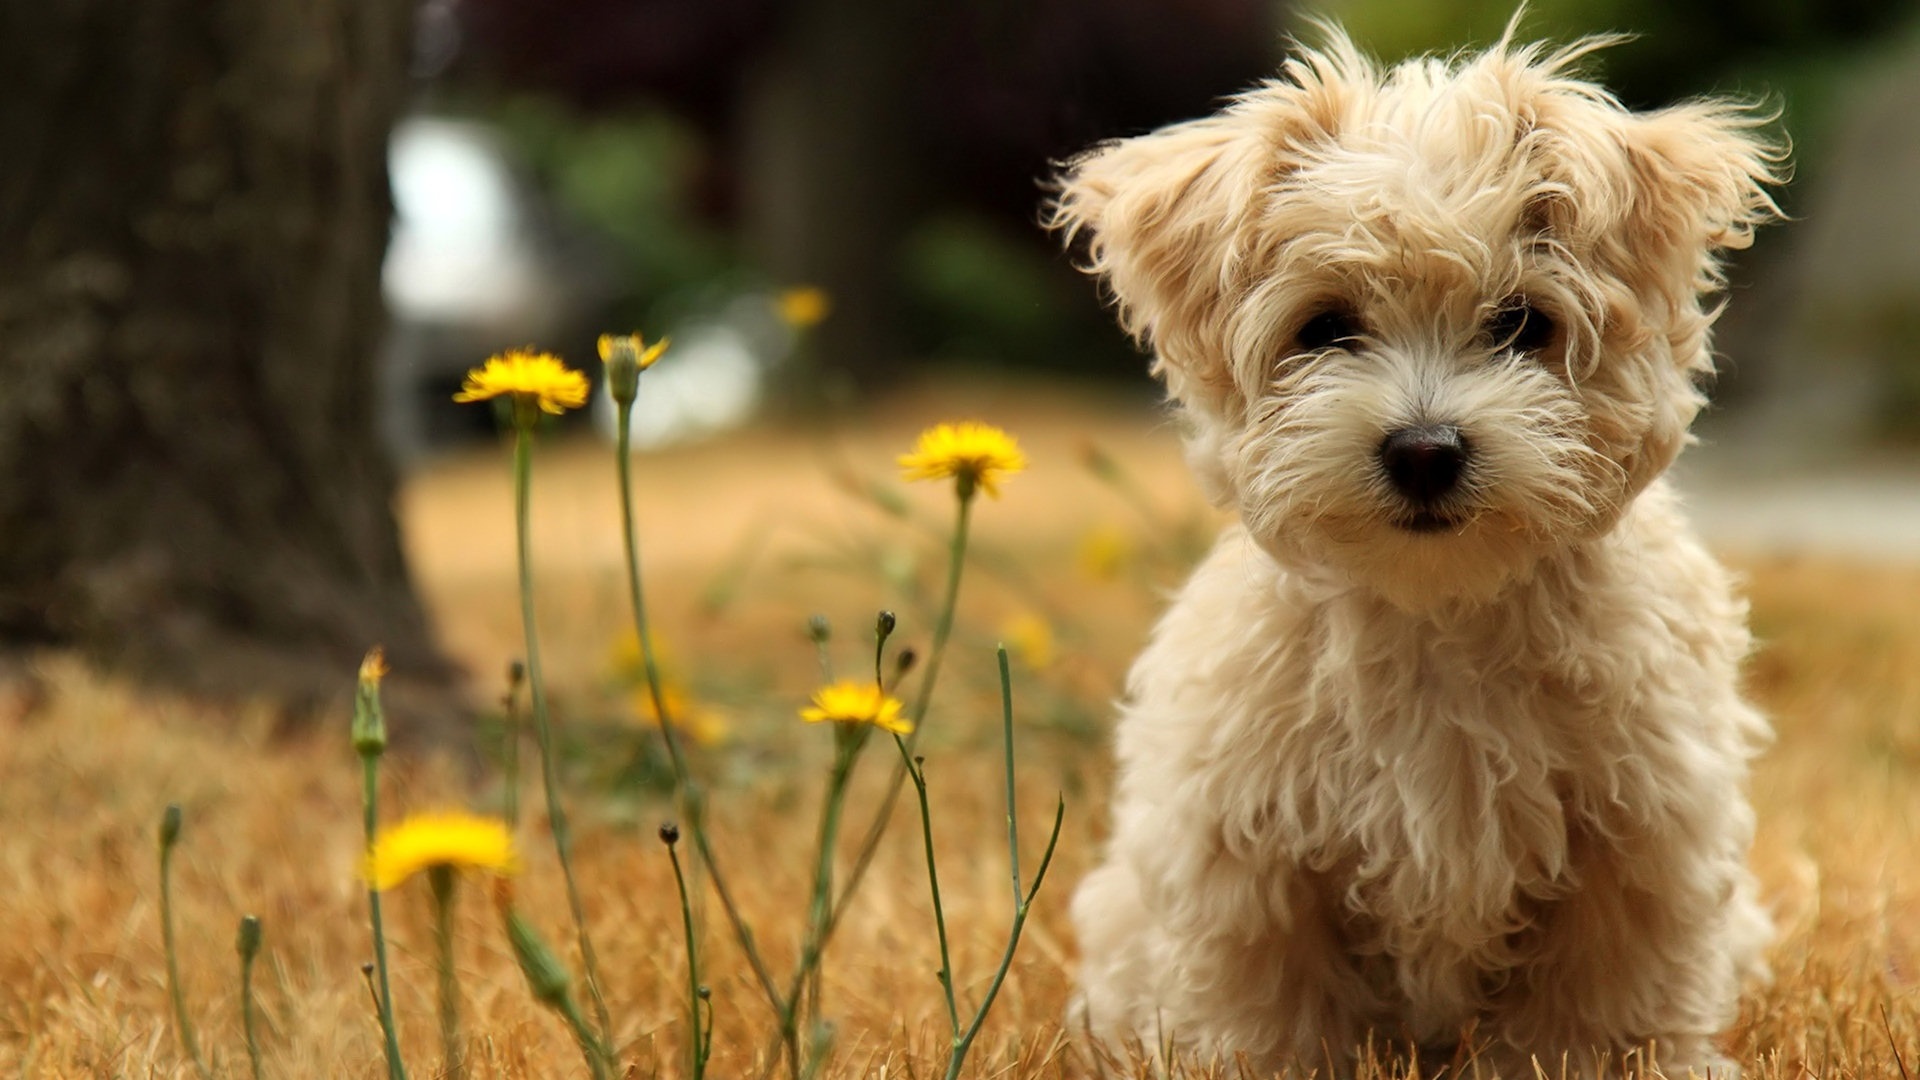 field in dog wallpapers